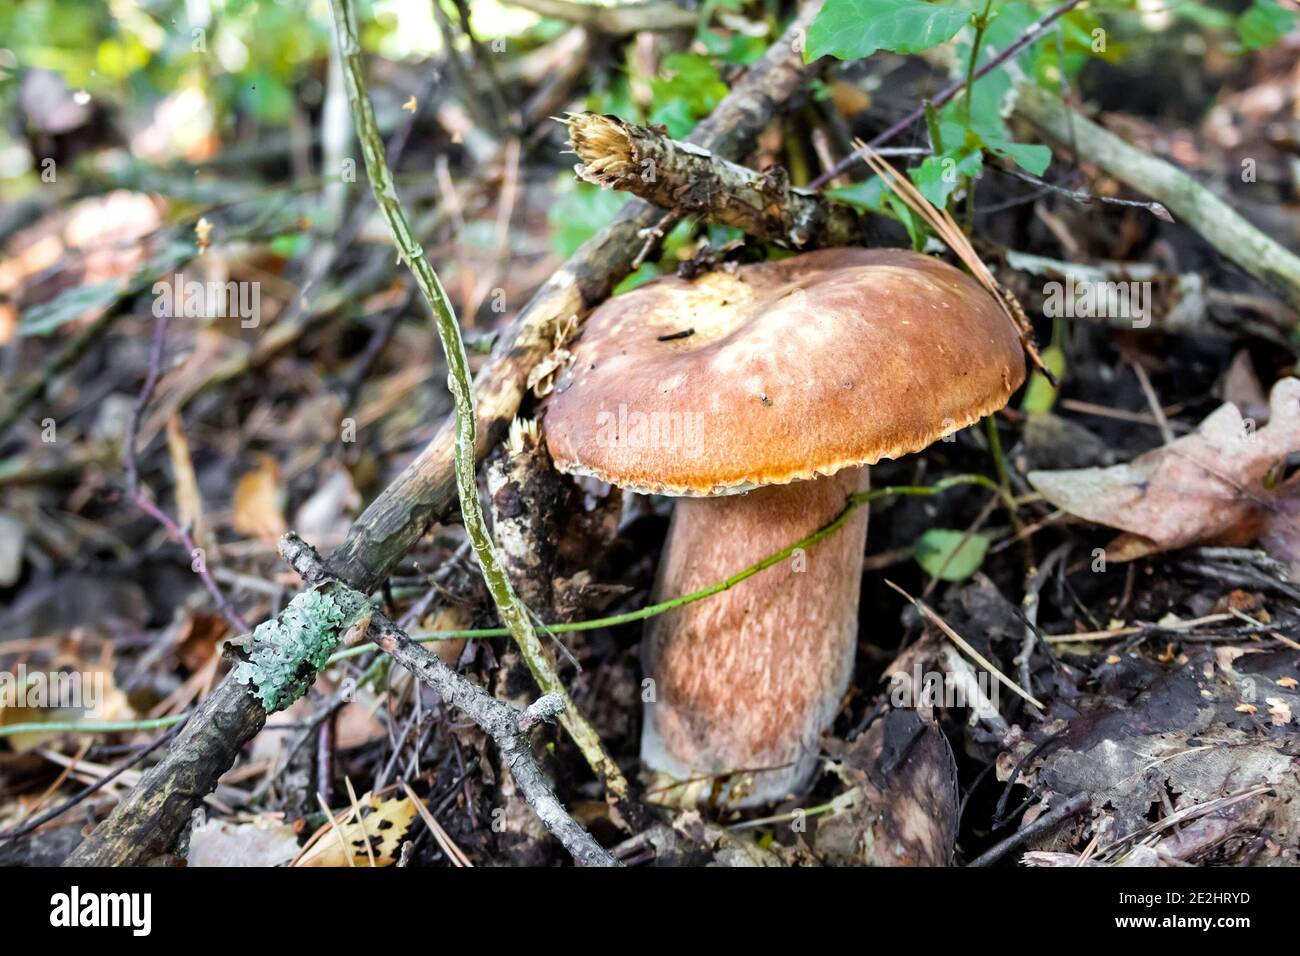 False cep (Tylopilus felleus), commonly known as the bitter bolete or the bitter tylopilus growing in its natural environment Stock Photo